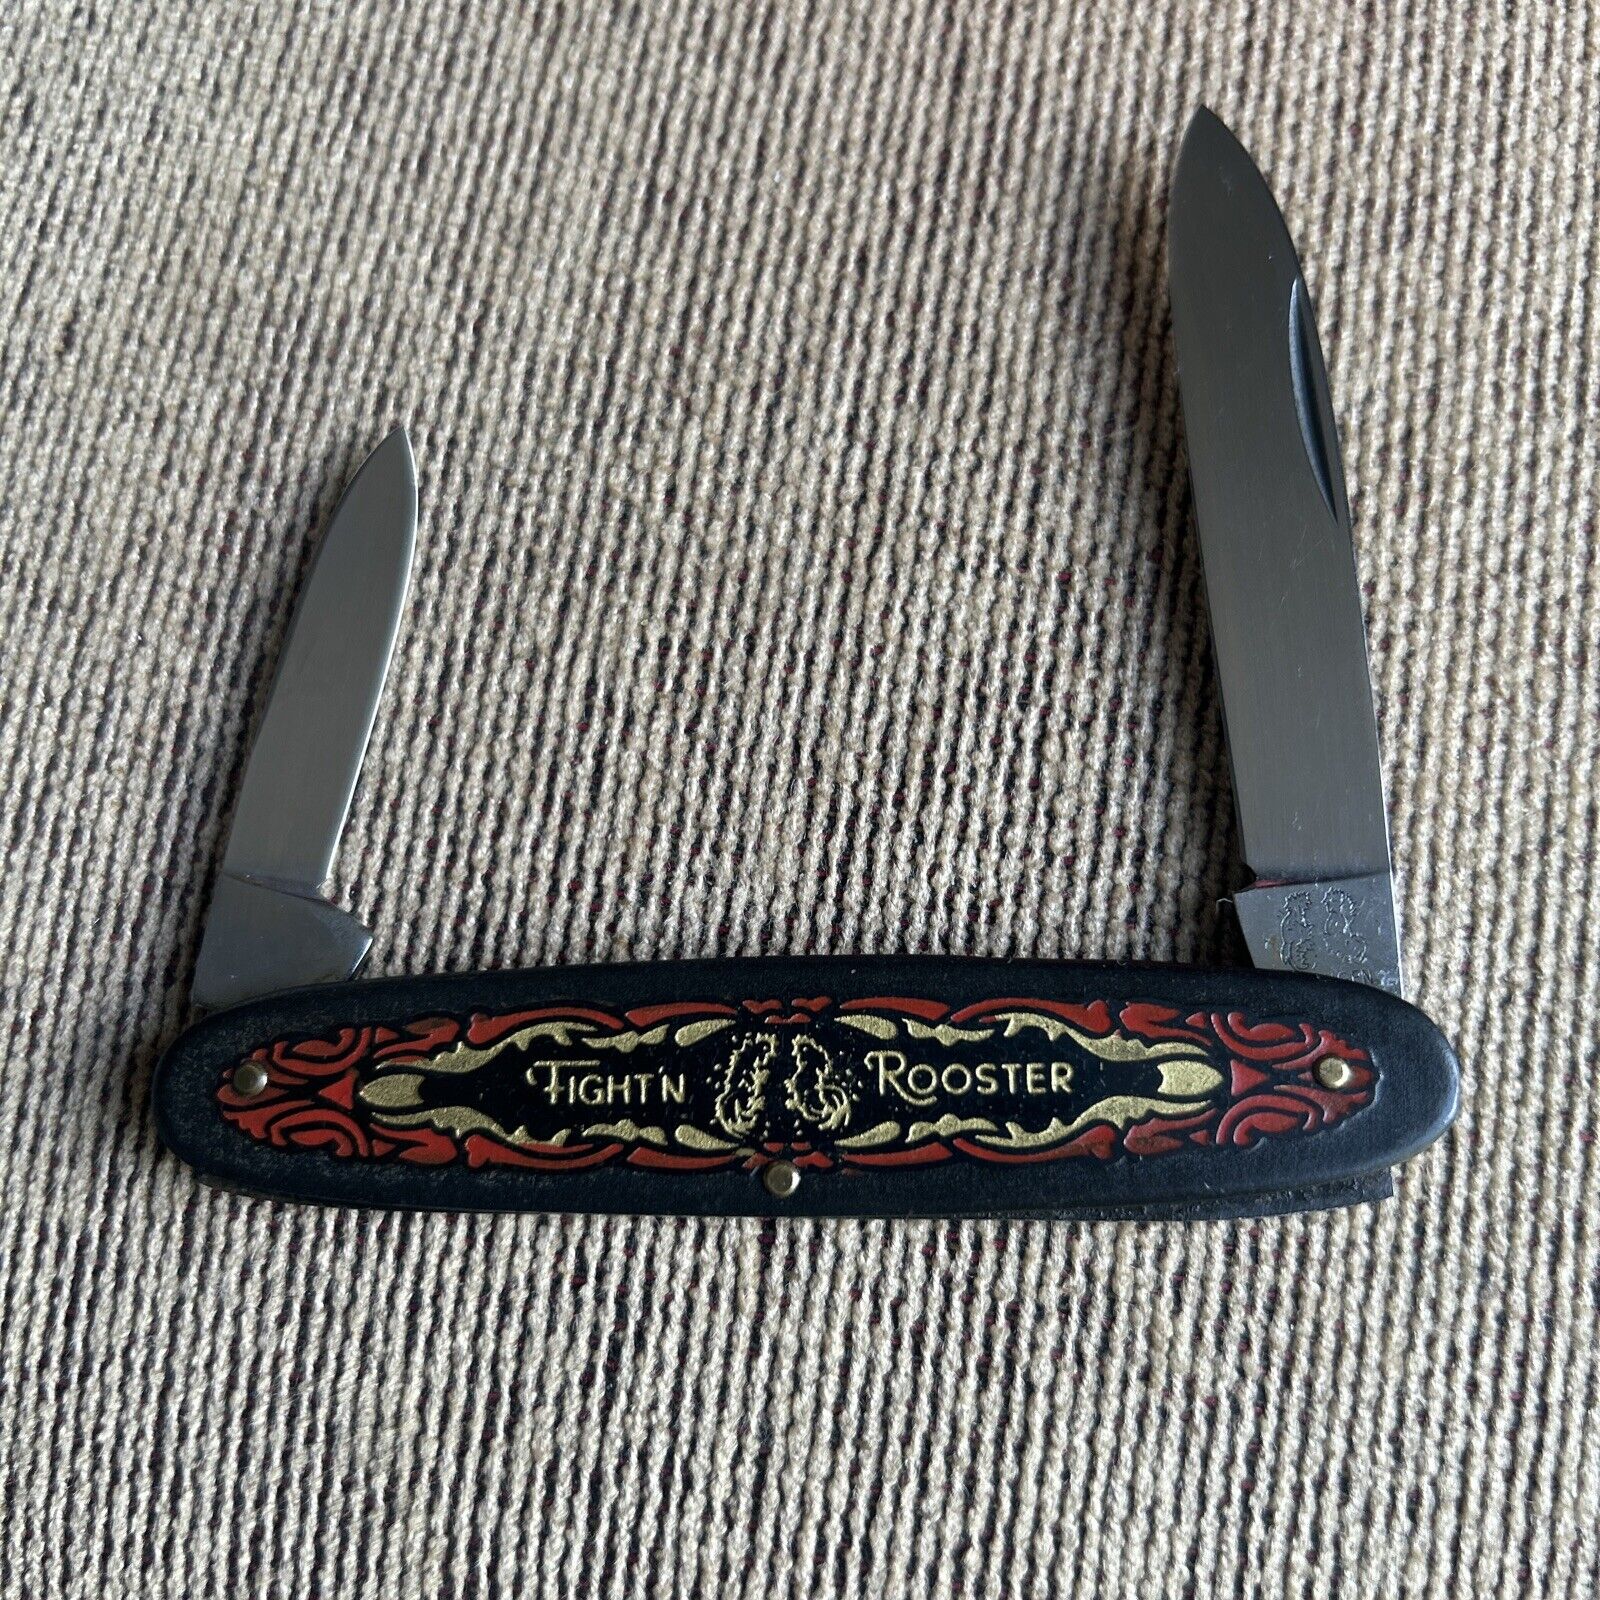 Fight’n Rooster Knife